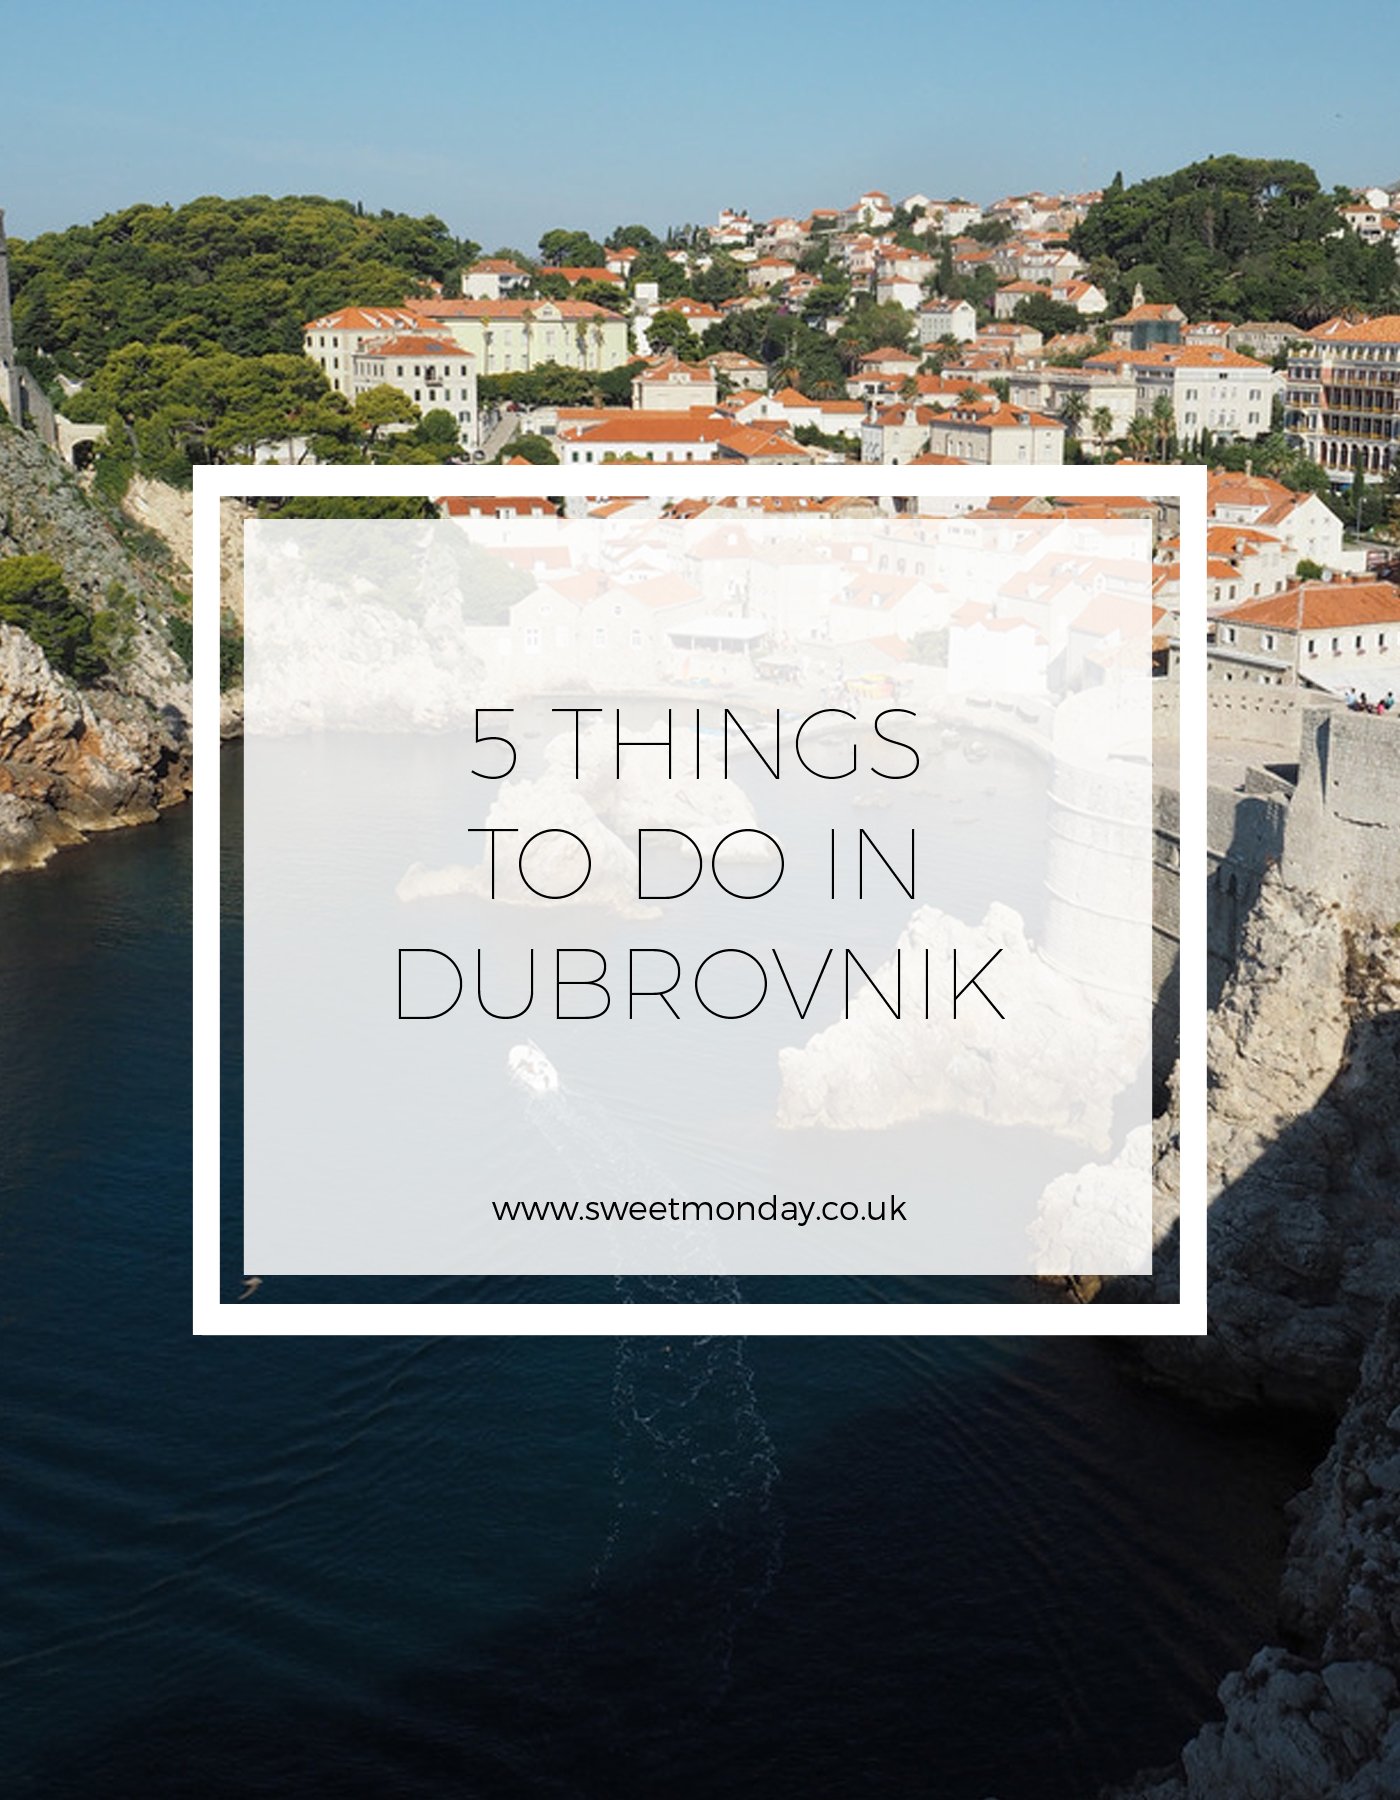 5 things to do in Dubrovnik